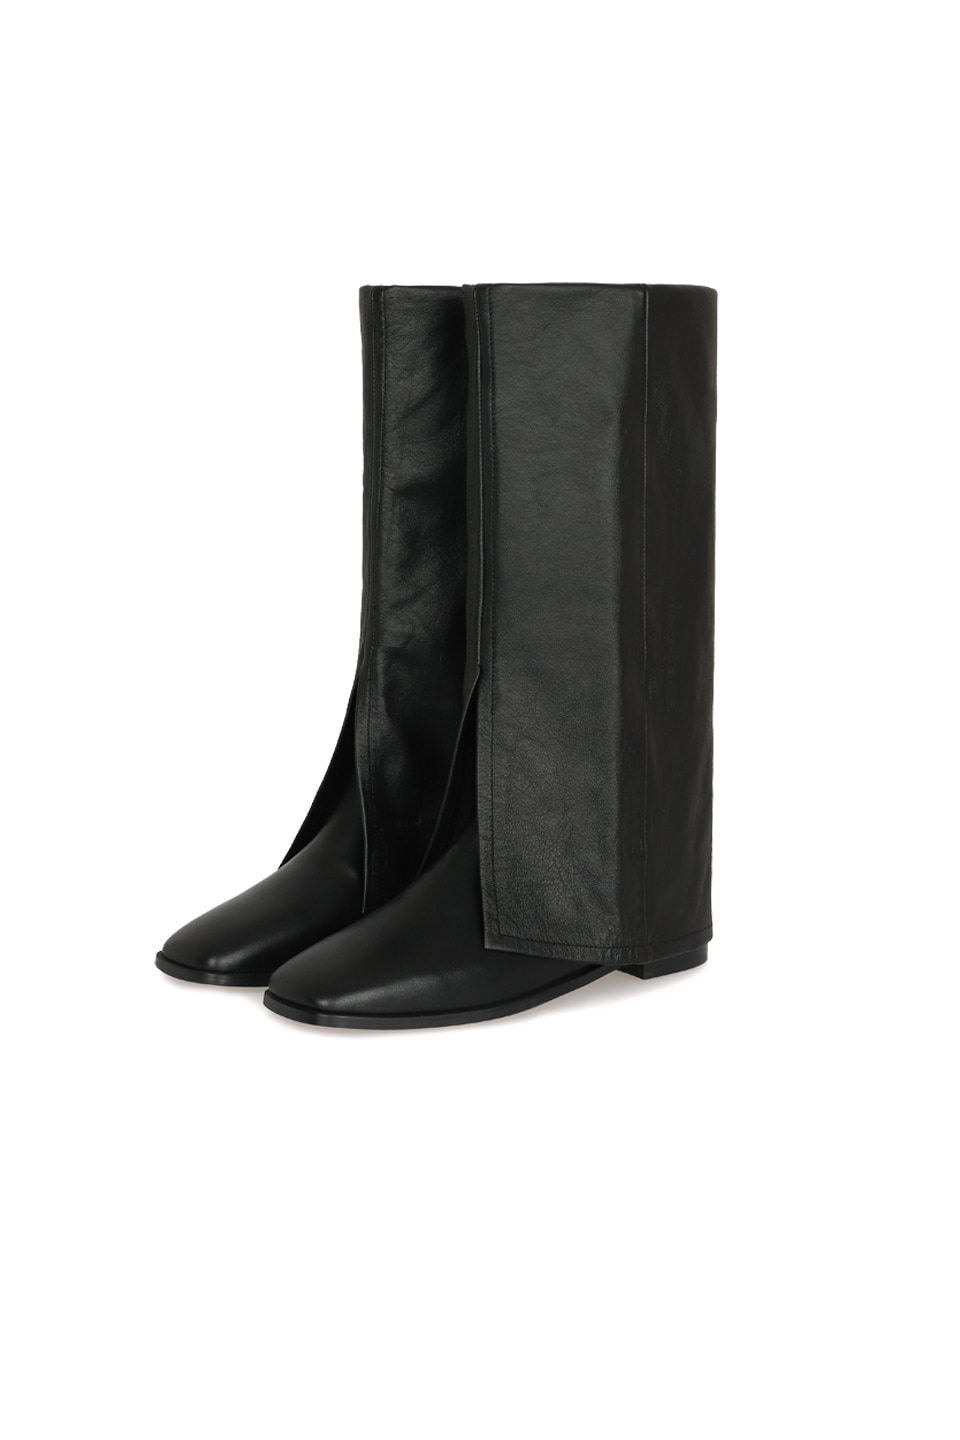 (ORDER-MADE) TWO-WAY LEATHER MID LENGTH BOOTS - BLACK